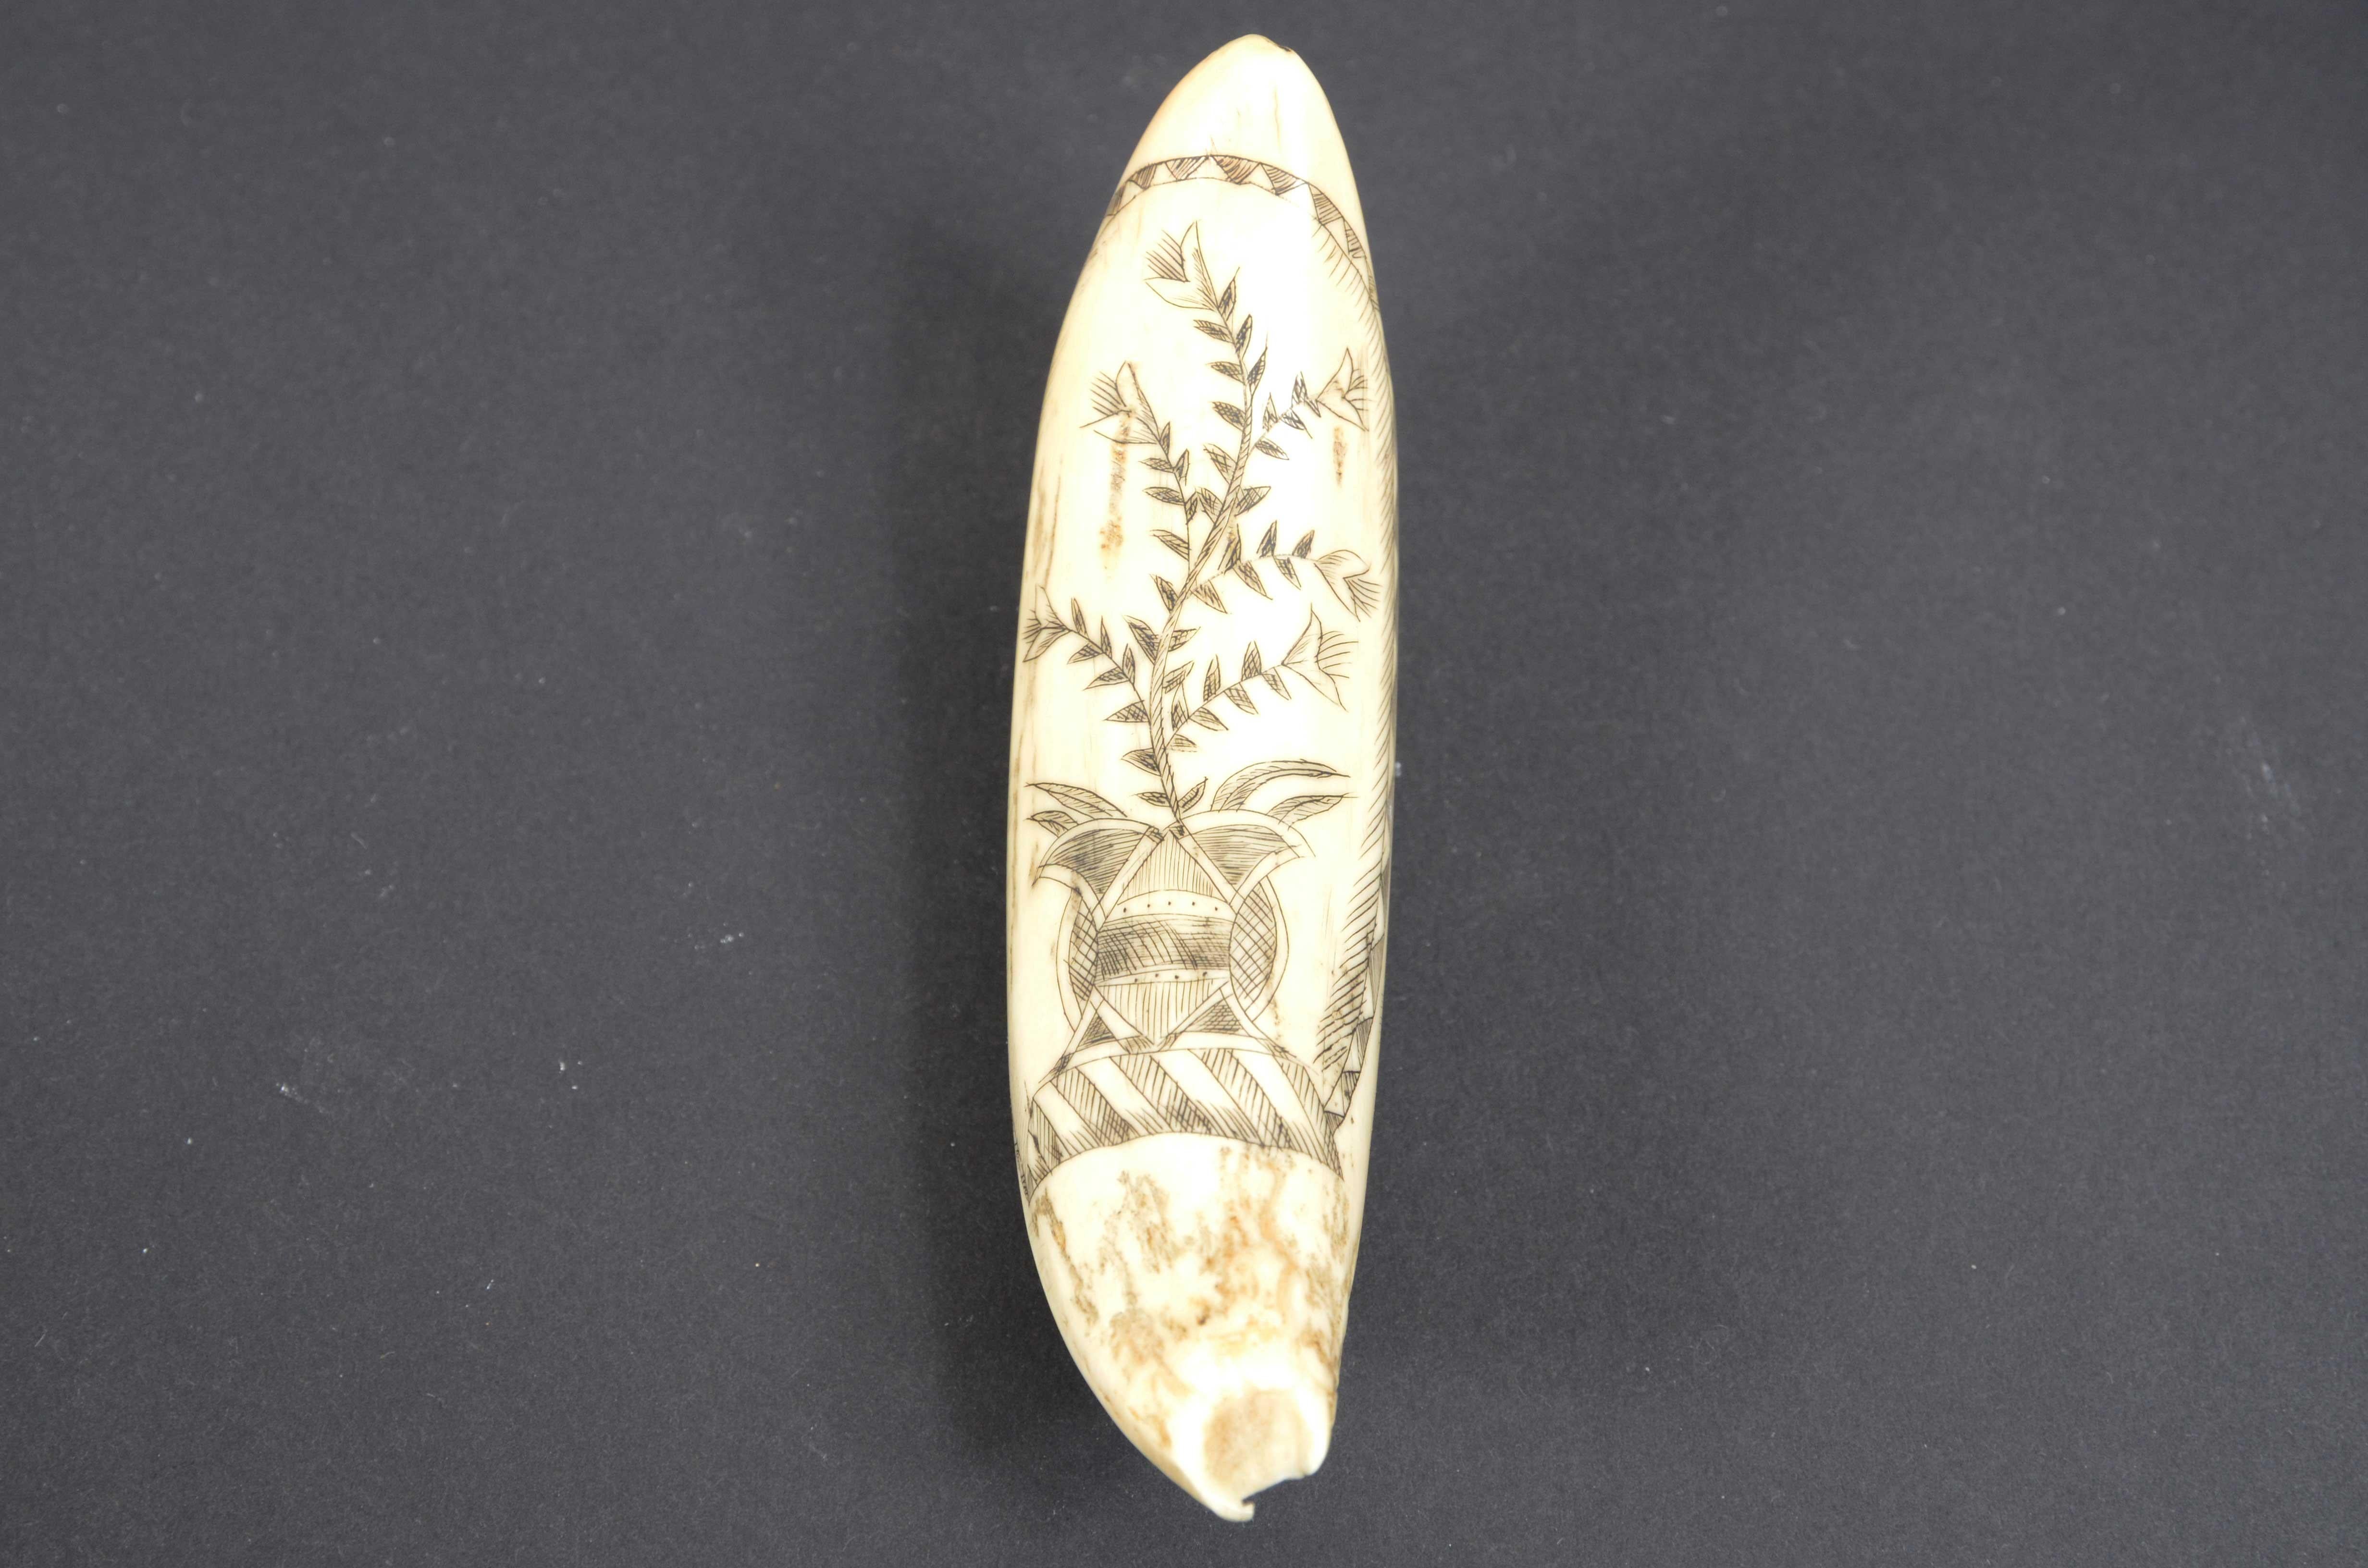 Scrimshaw of a vertically engraved hour's tooth depicting a vessel bow to left flag of the United Kingdom, above li initials L.G.F. On the back vase with beautiful plant decoration showing leaves and flowers, all framed by a beautiful scroll.